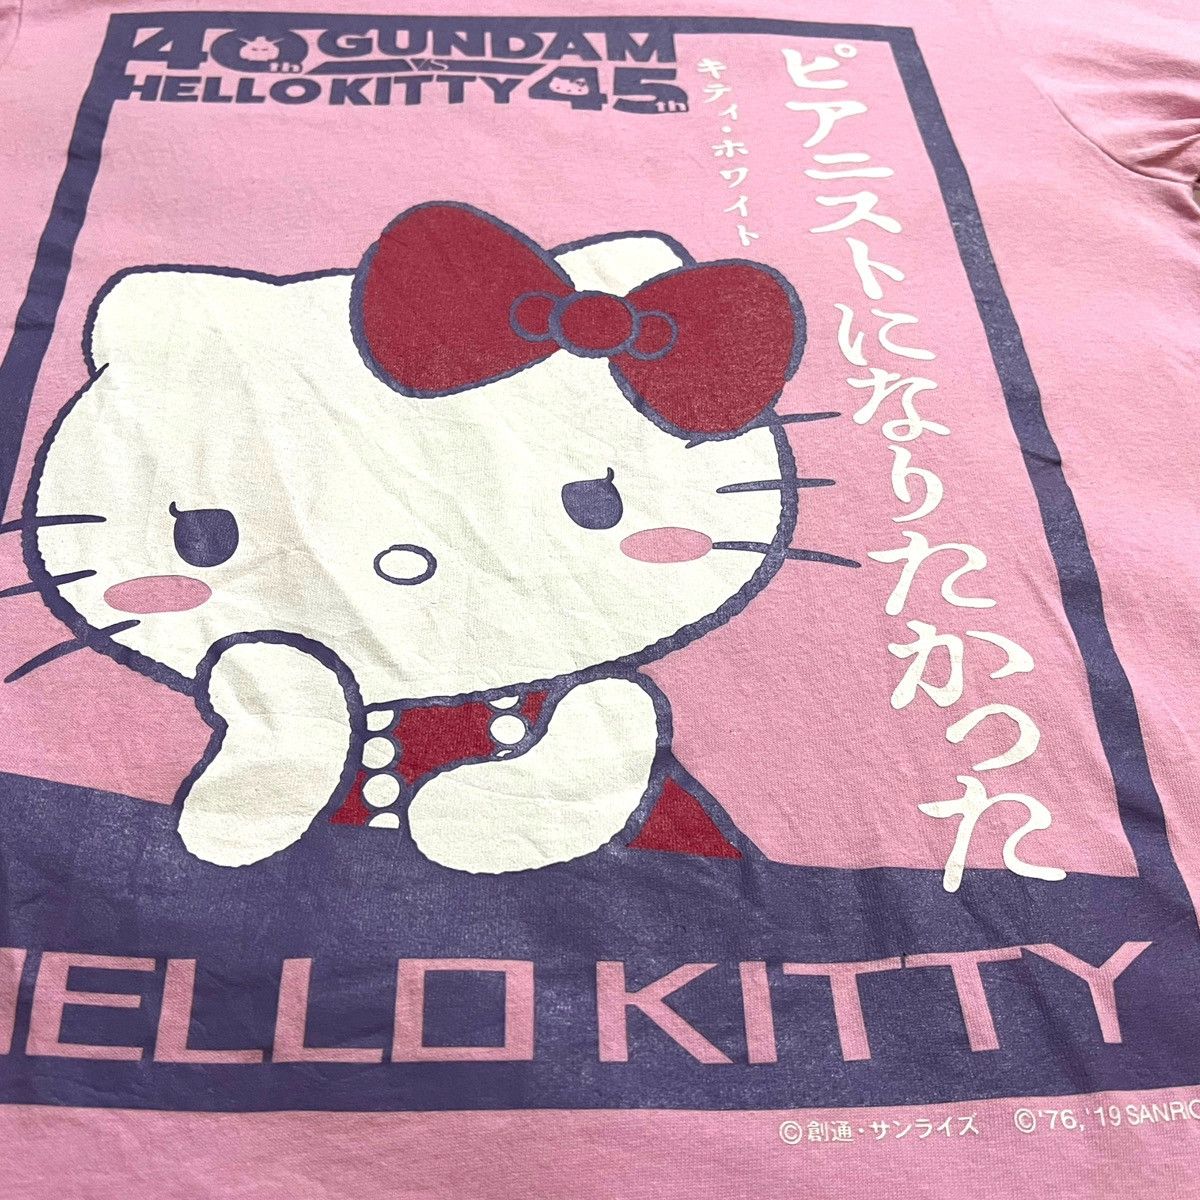 Japanese Brand LIMITED EDITION 2019 GUNDAM X HELLO KITTY PINK TEE IN PINK Size US M / EU 48-50 / 2 - 8 Thumbnail